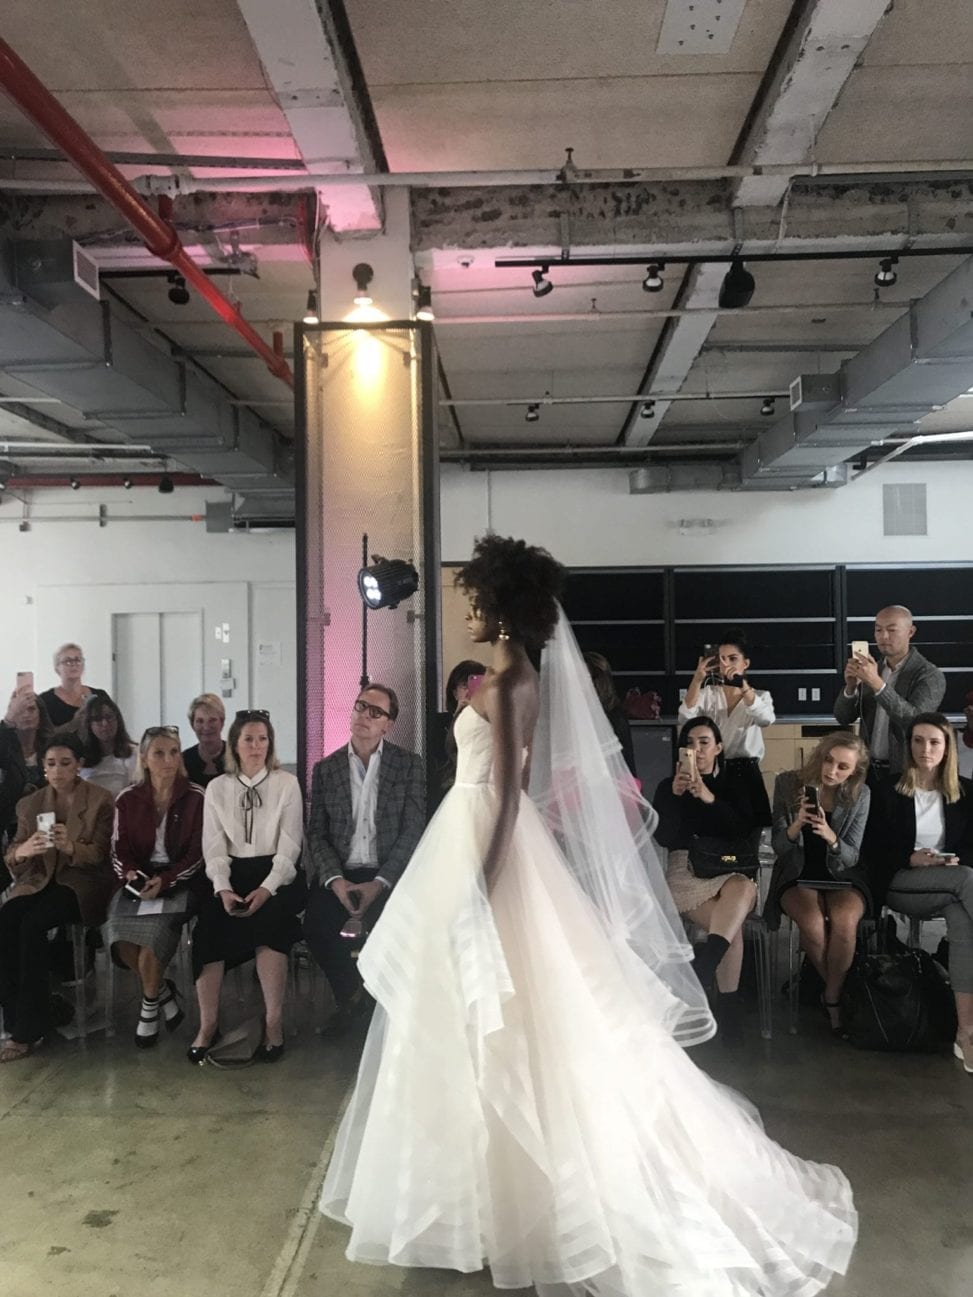 An African-American model walks the runway in a strapless wedding dress with veil in the Watters 2019 fall show at New York Bridal Fashion Week